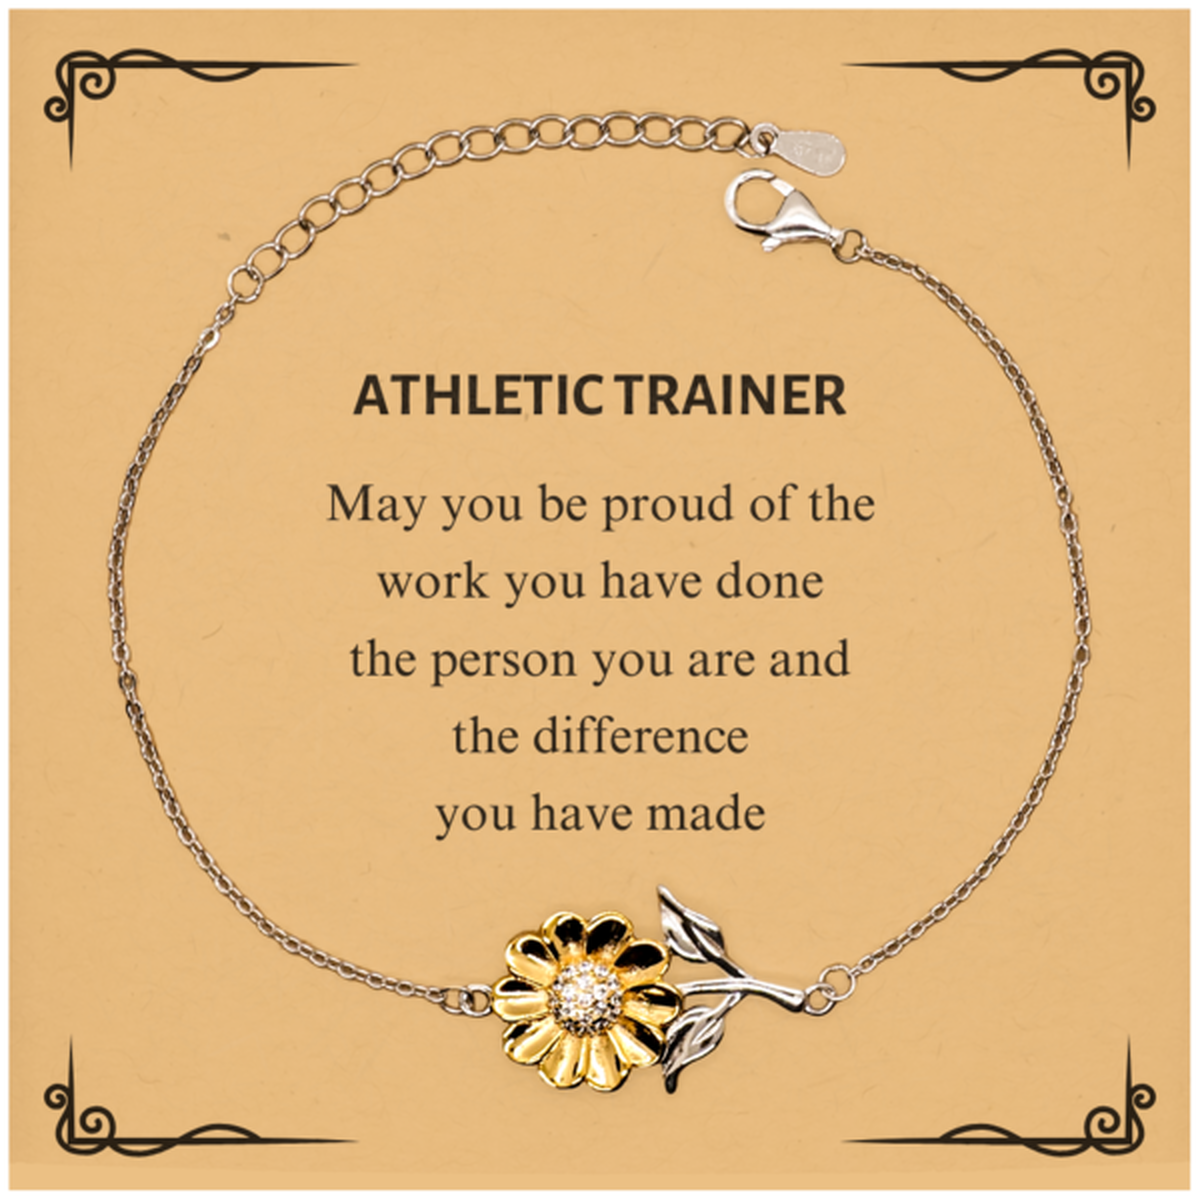 Athletic Trainer May you be proud of the work you have done, Retirement Athletic Trainer Sunflower Bracelet for Colleague Appreciation Gifts Amazing for Athletic Trainer